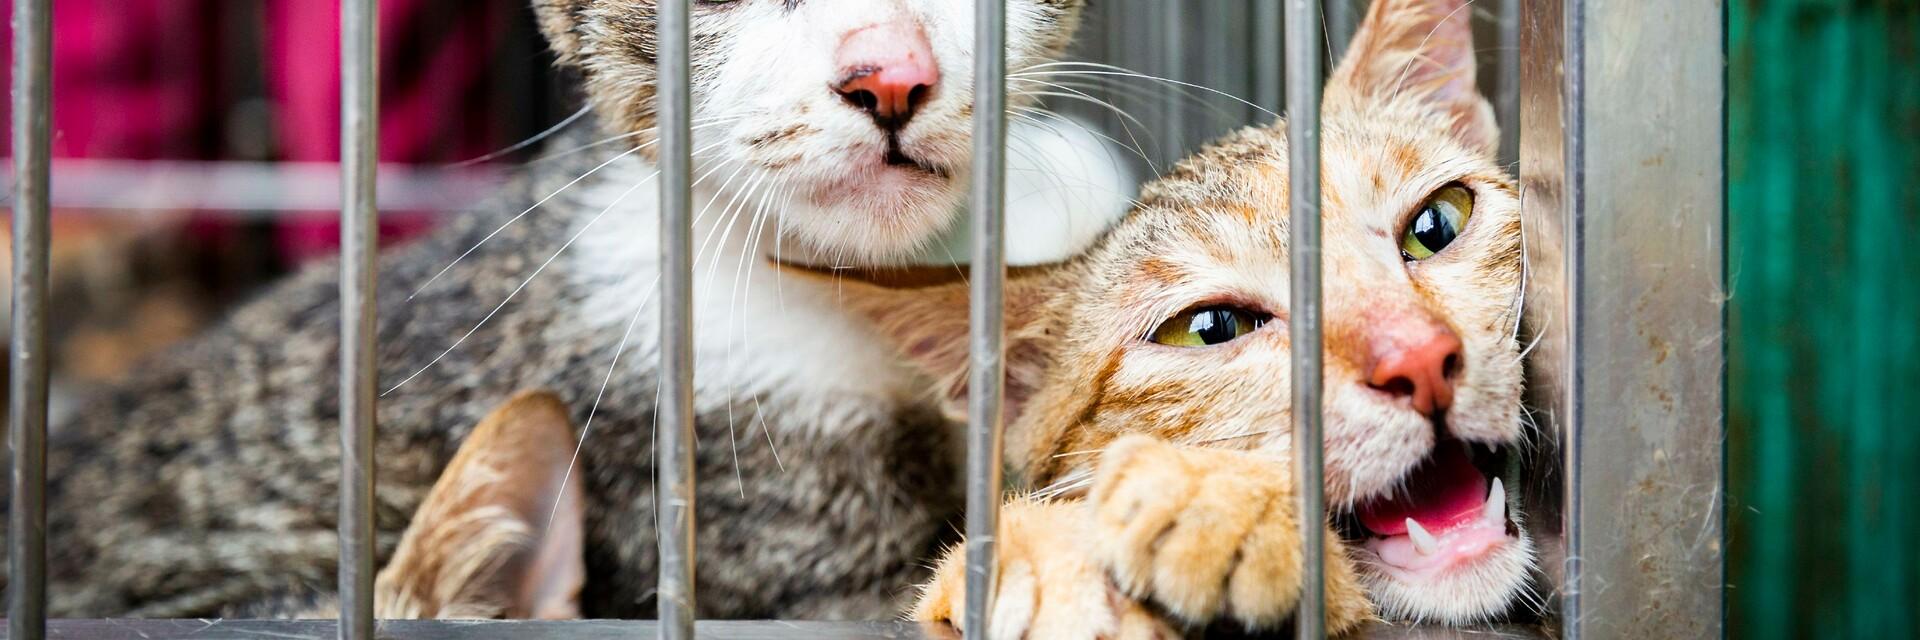 Cats in a cage.